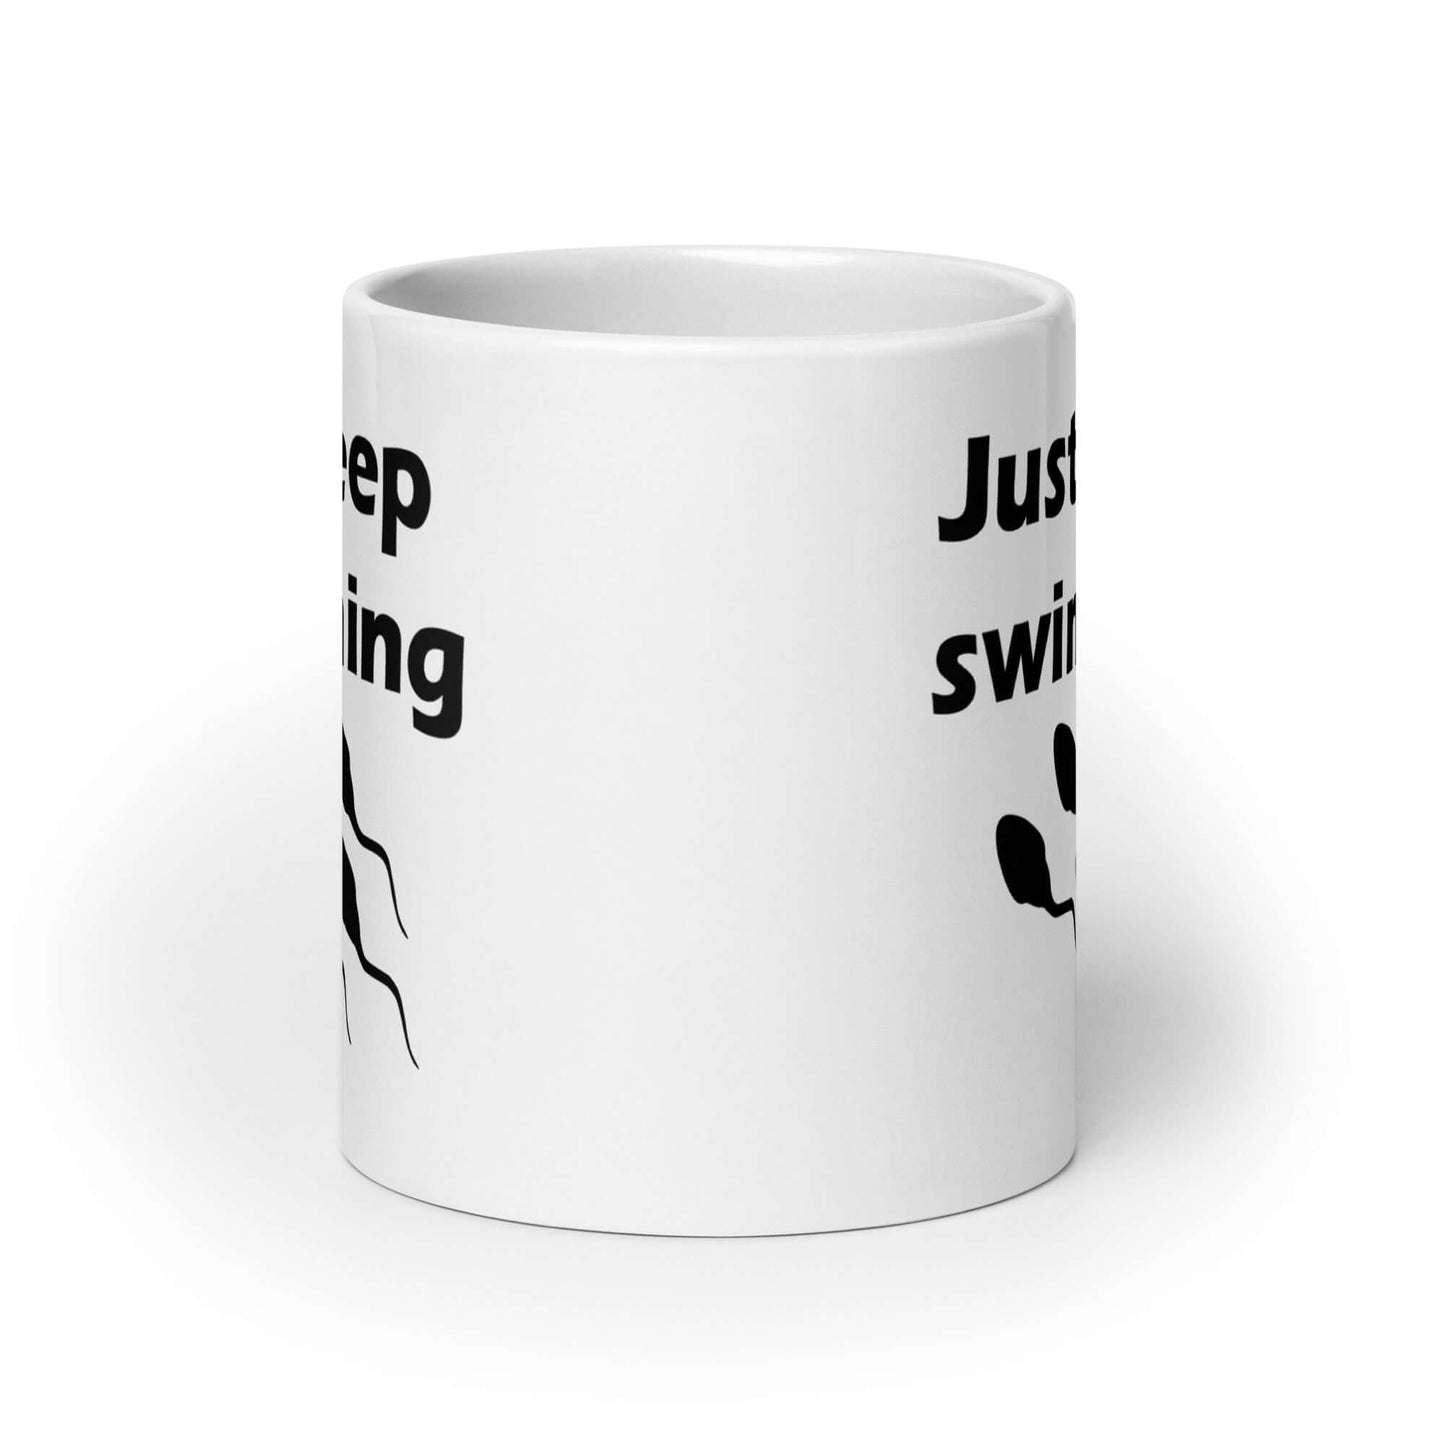 White ceramic coffee mug with the phrase Just keep swimming printed on both sides of the mug. There is an image of some swimming sperm underneath the words.